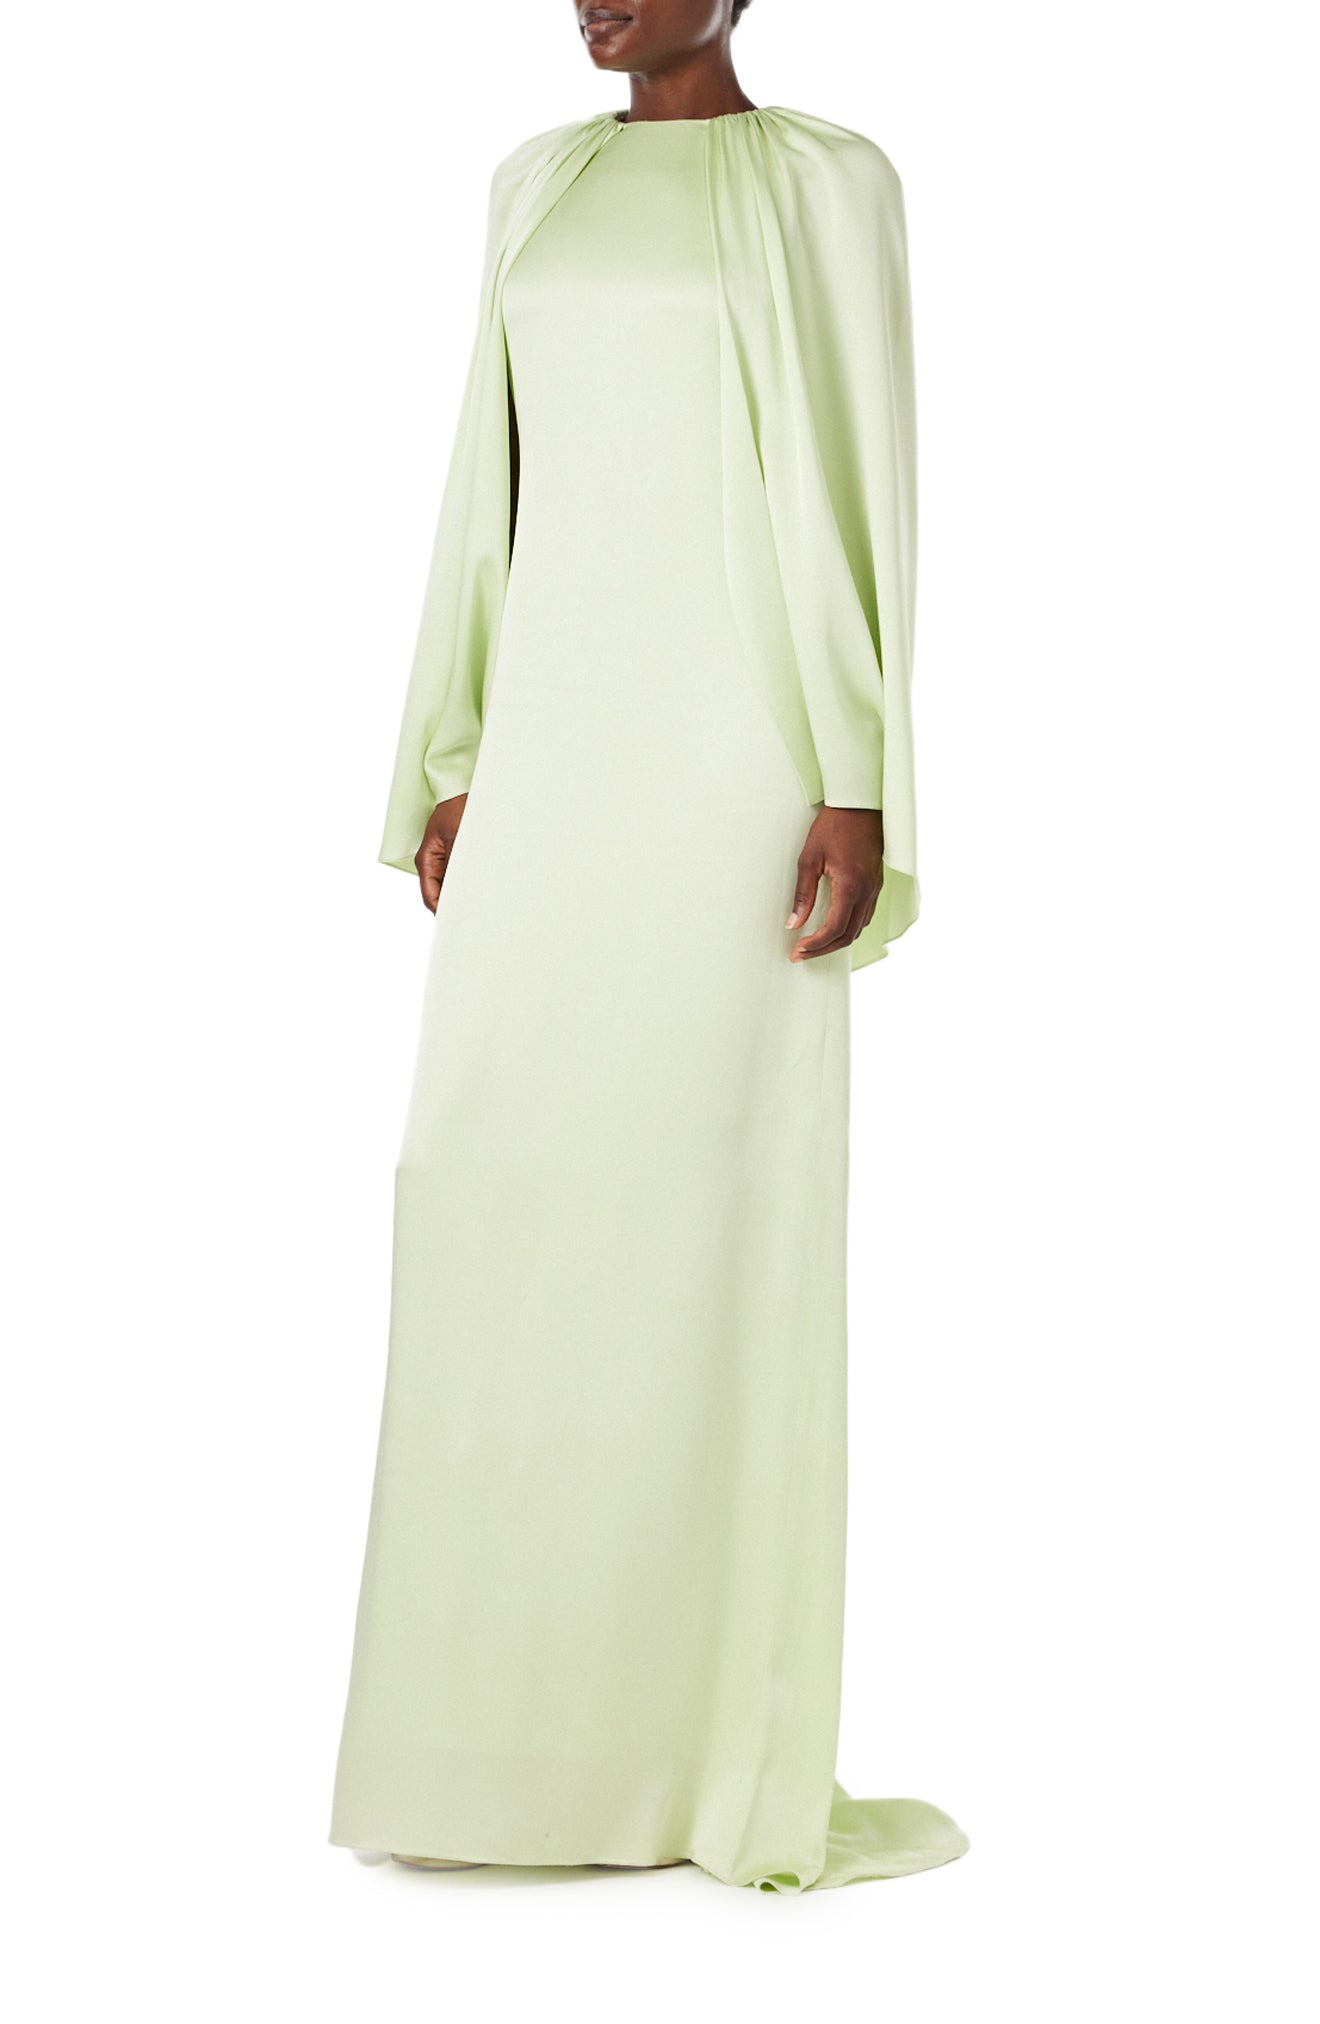 Monique Lhuillier Spring 2024 floor length capelet gown with jewel neckline in honeydew colored crepe back satin - left side.